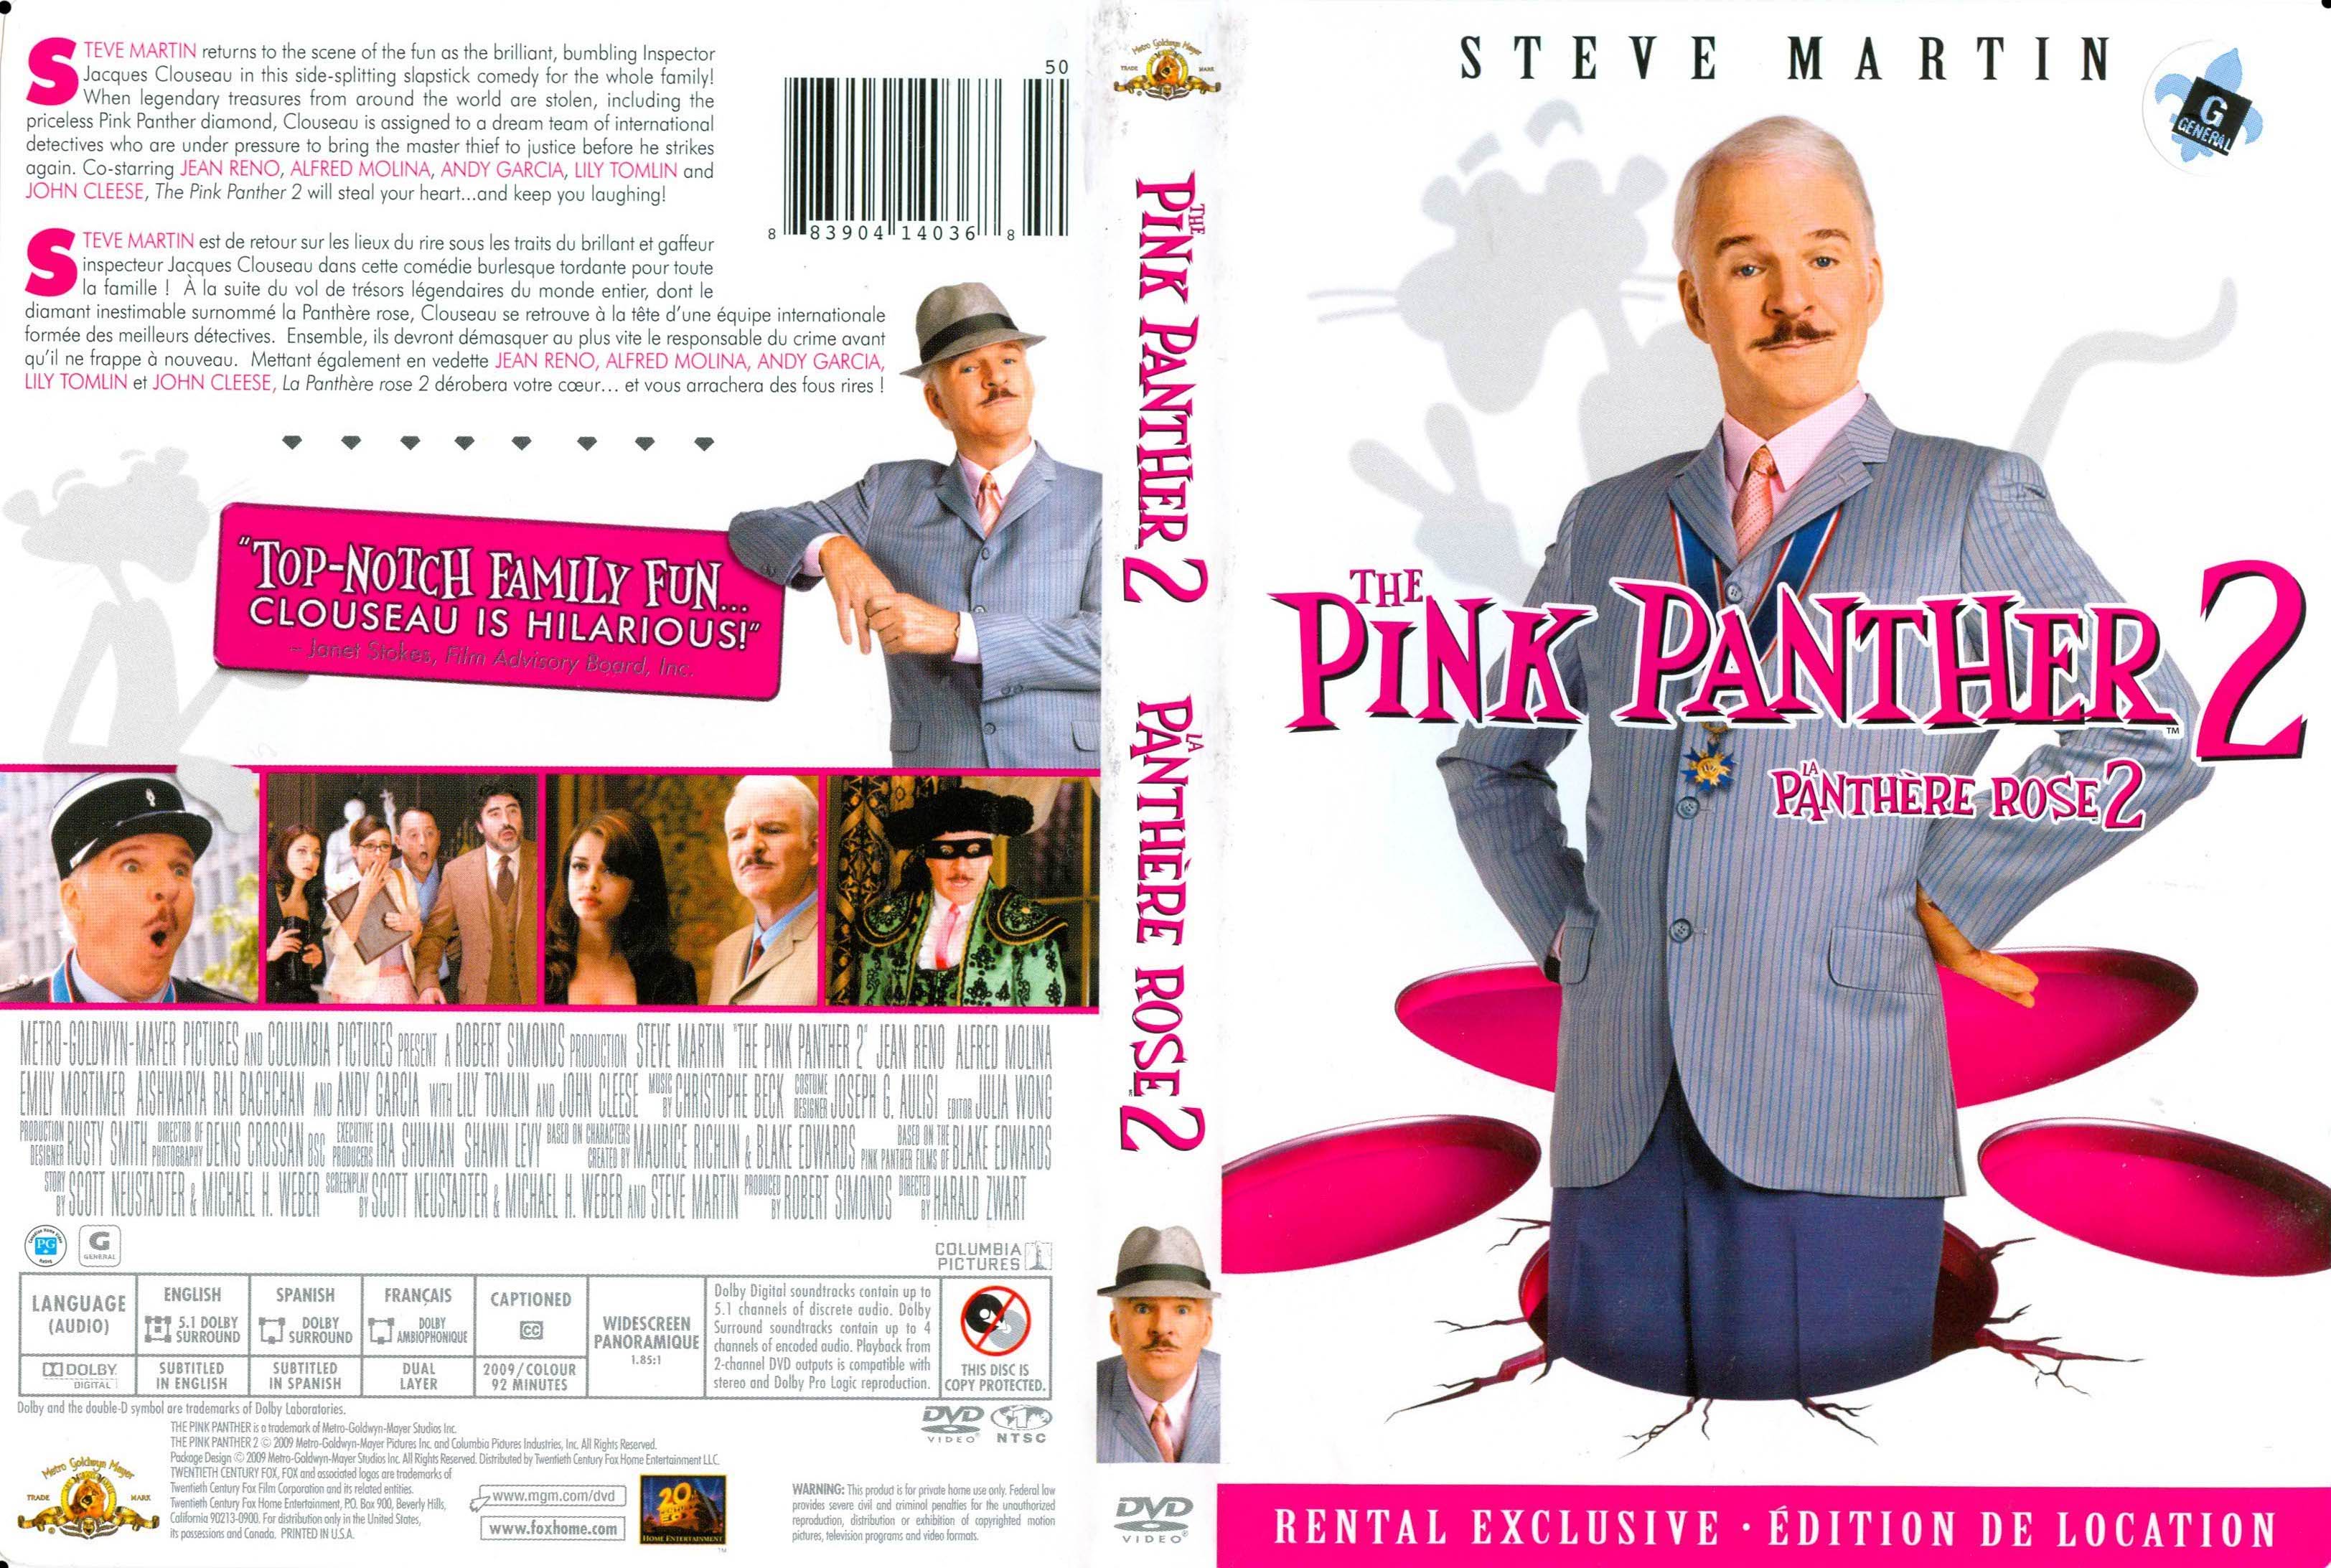 Jaquette DVD La panthre rose 2 - The pink panther 2 (Canadienne)